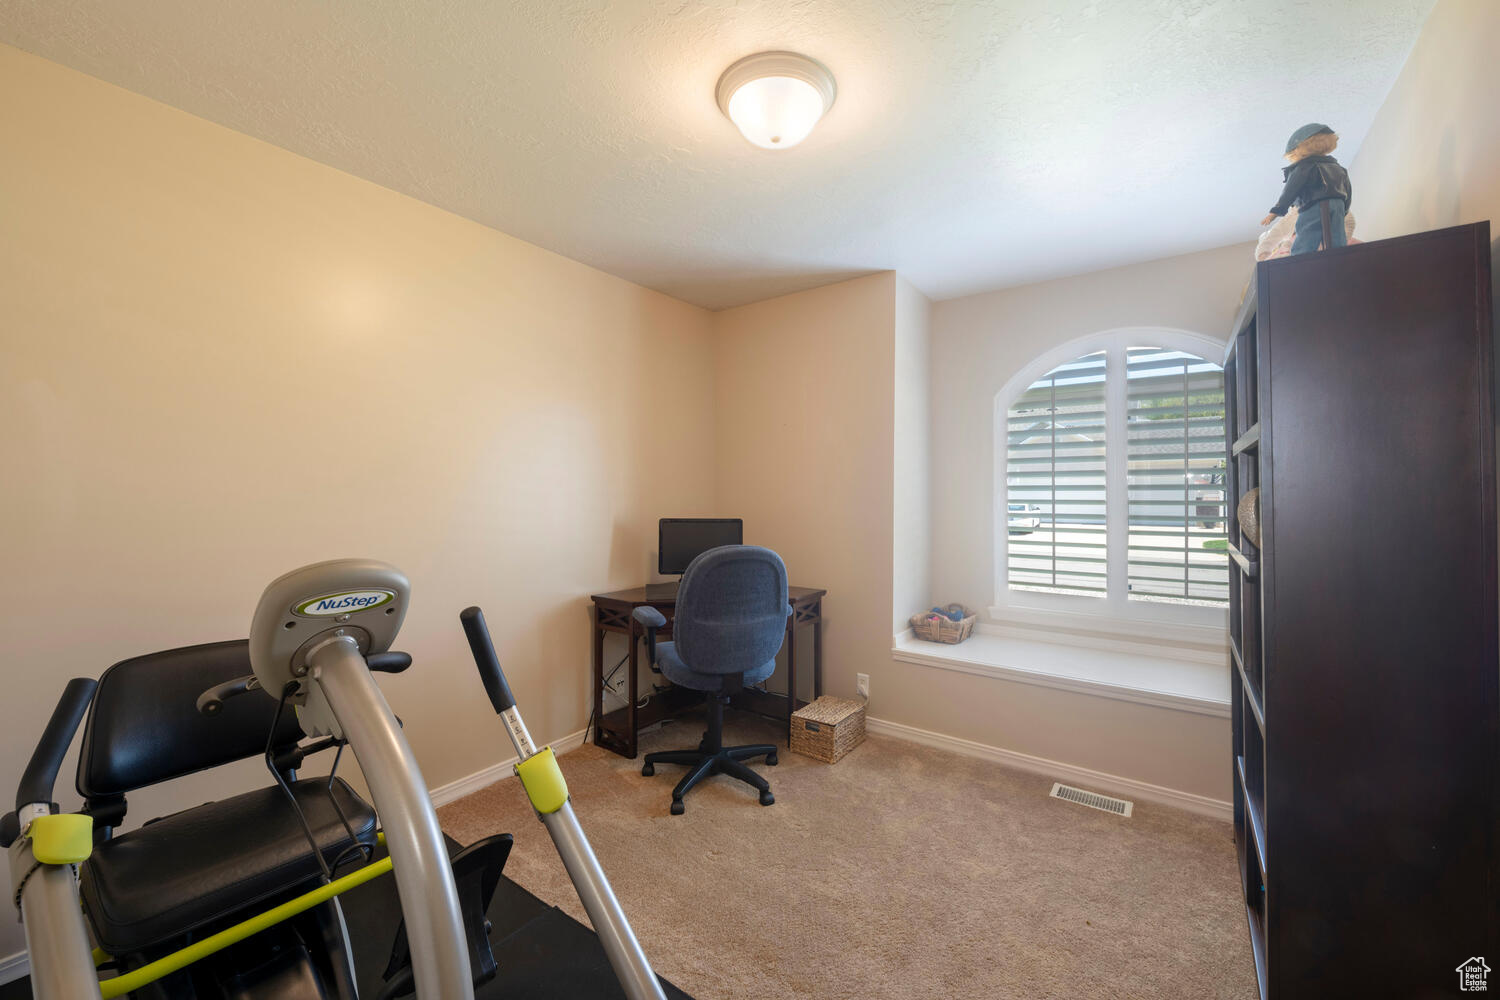 Third Bedroom or office space with carpet flooring